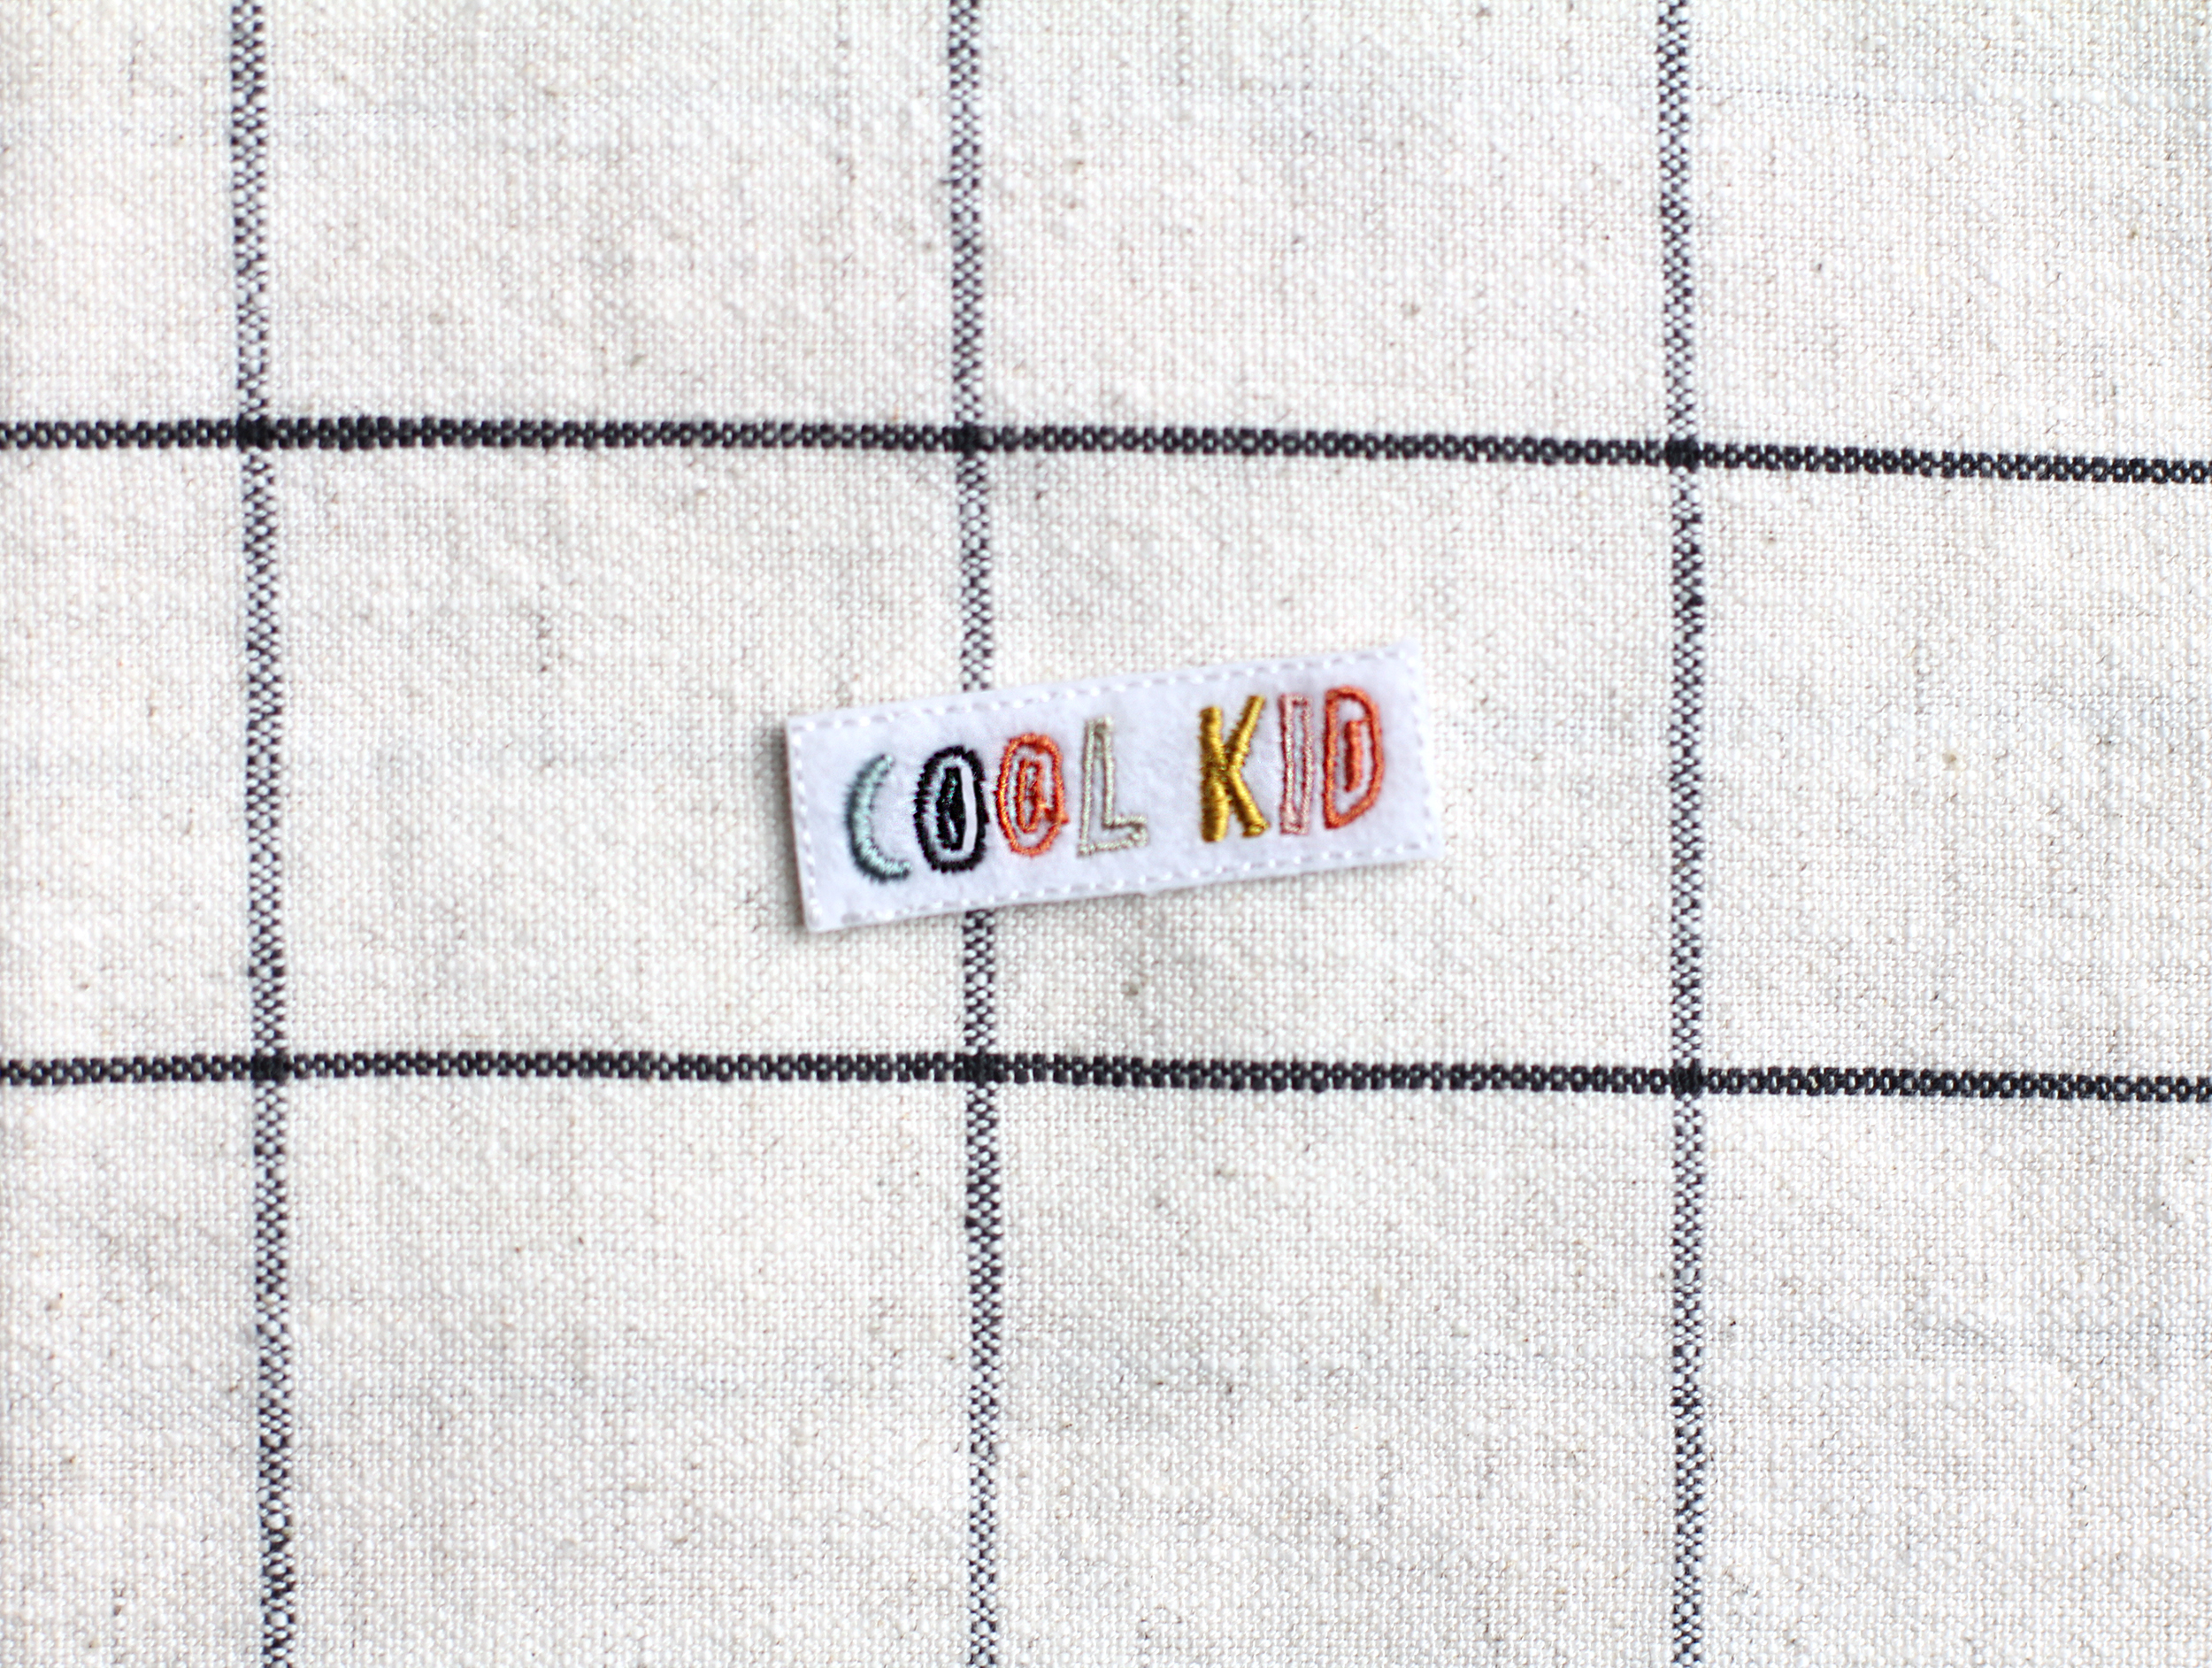 Coolkid_Patch2_web